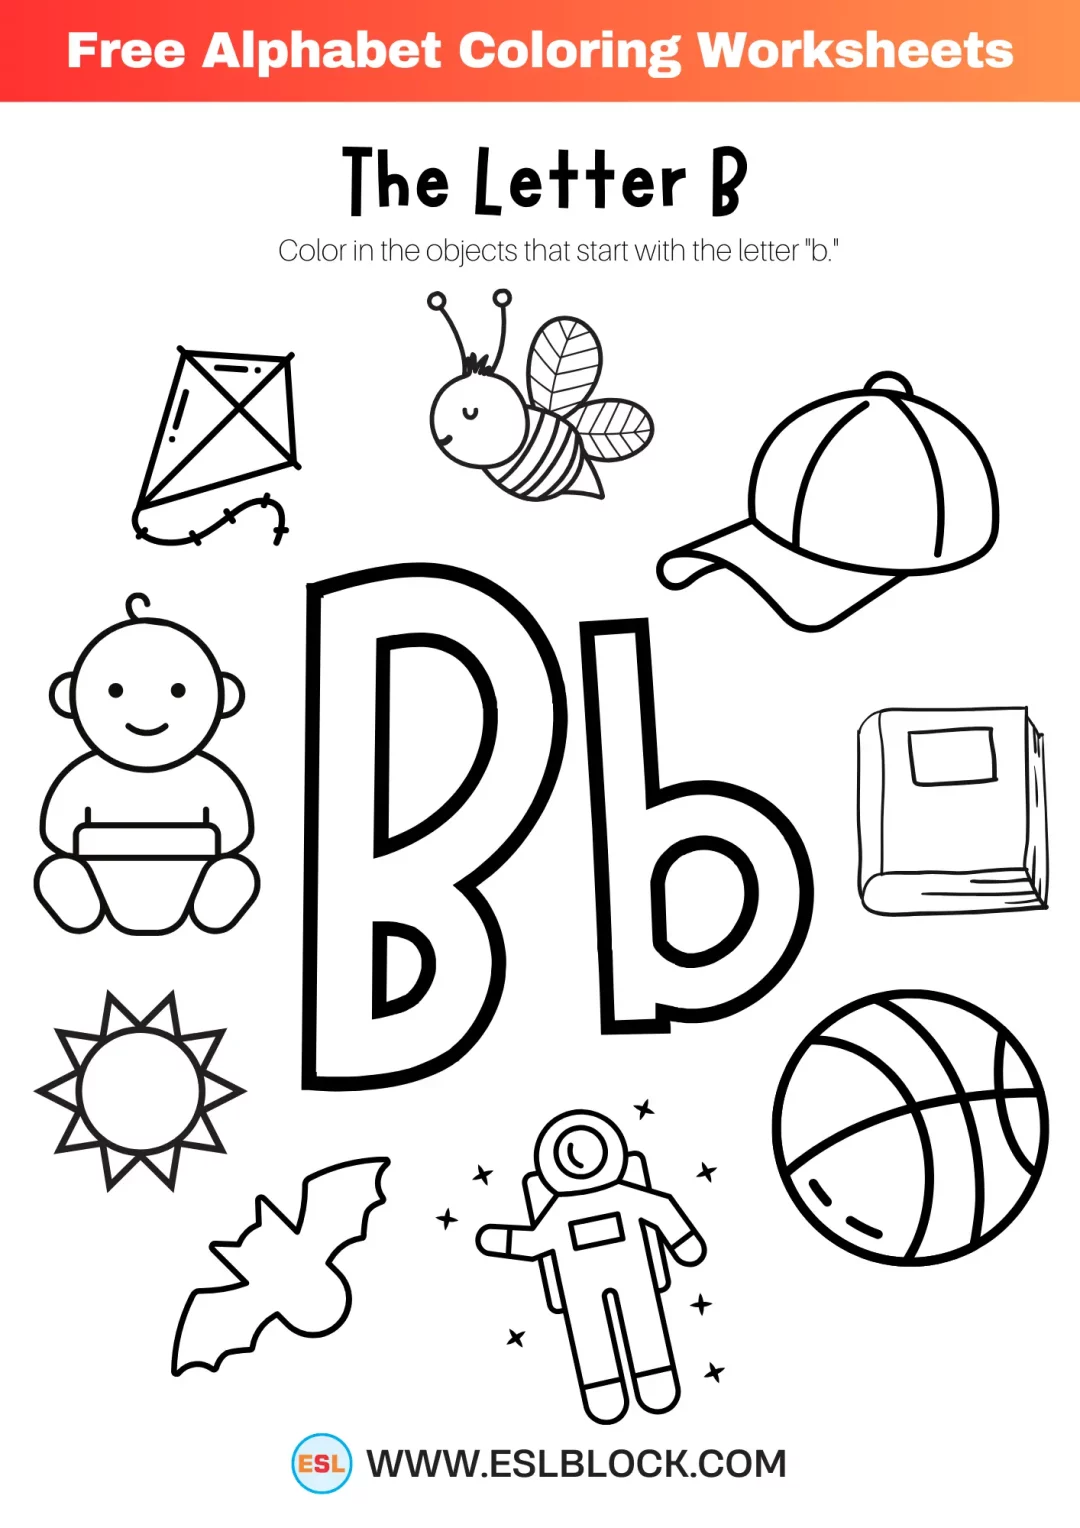 A to Z Alphabet Coloring Worksheets